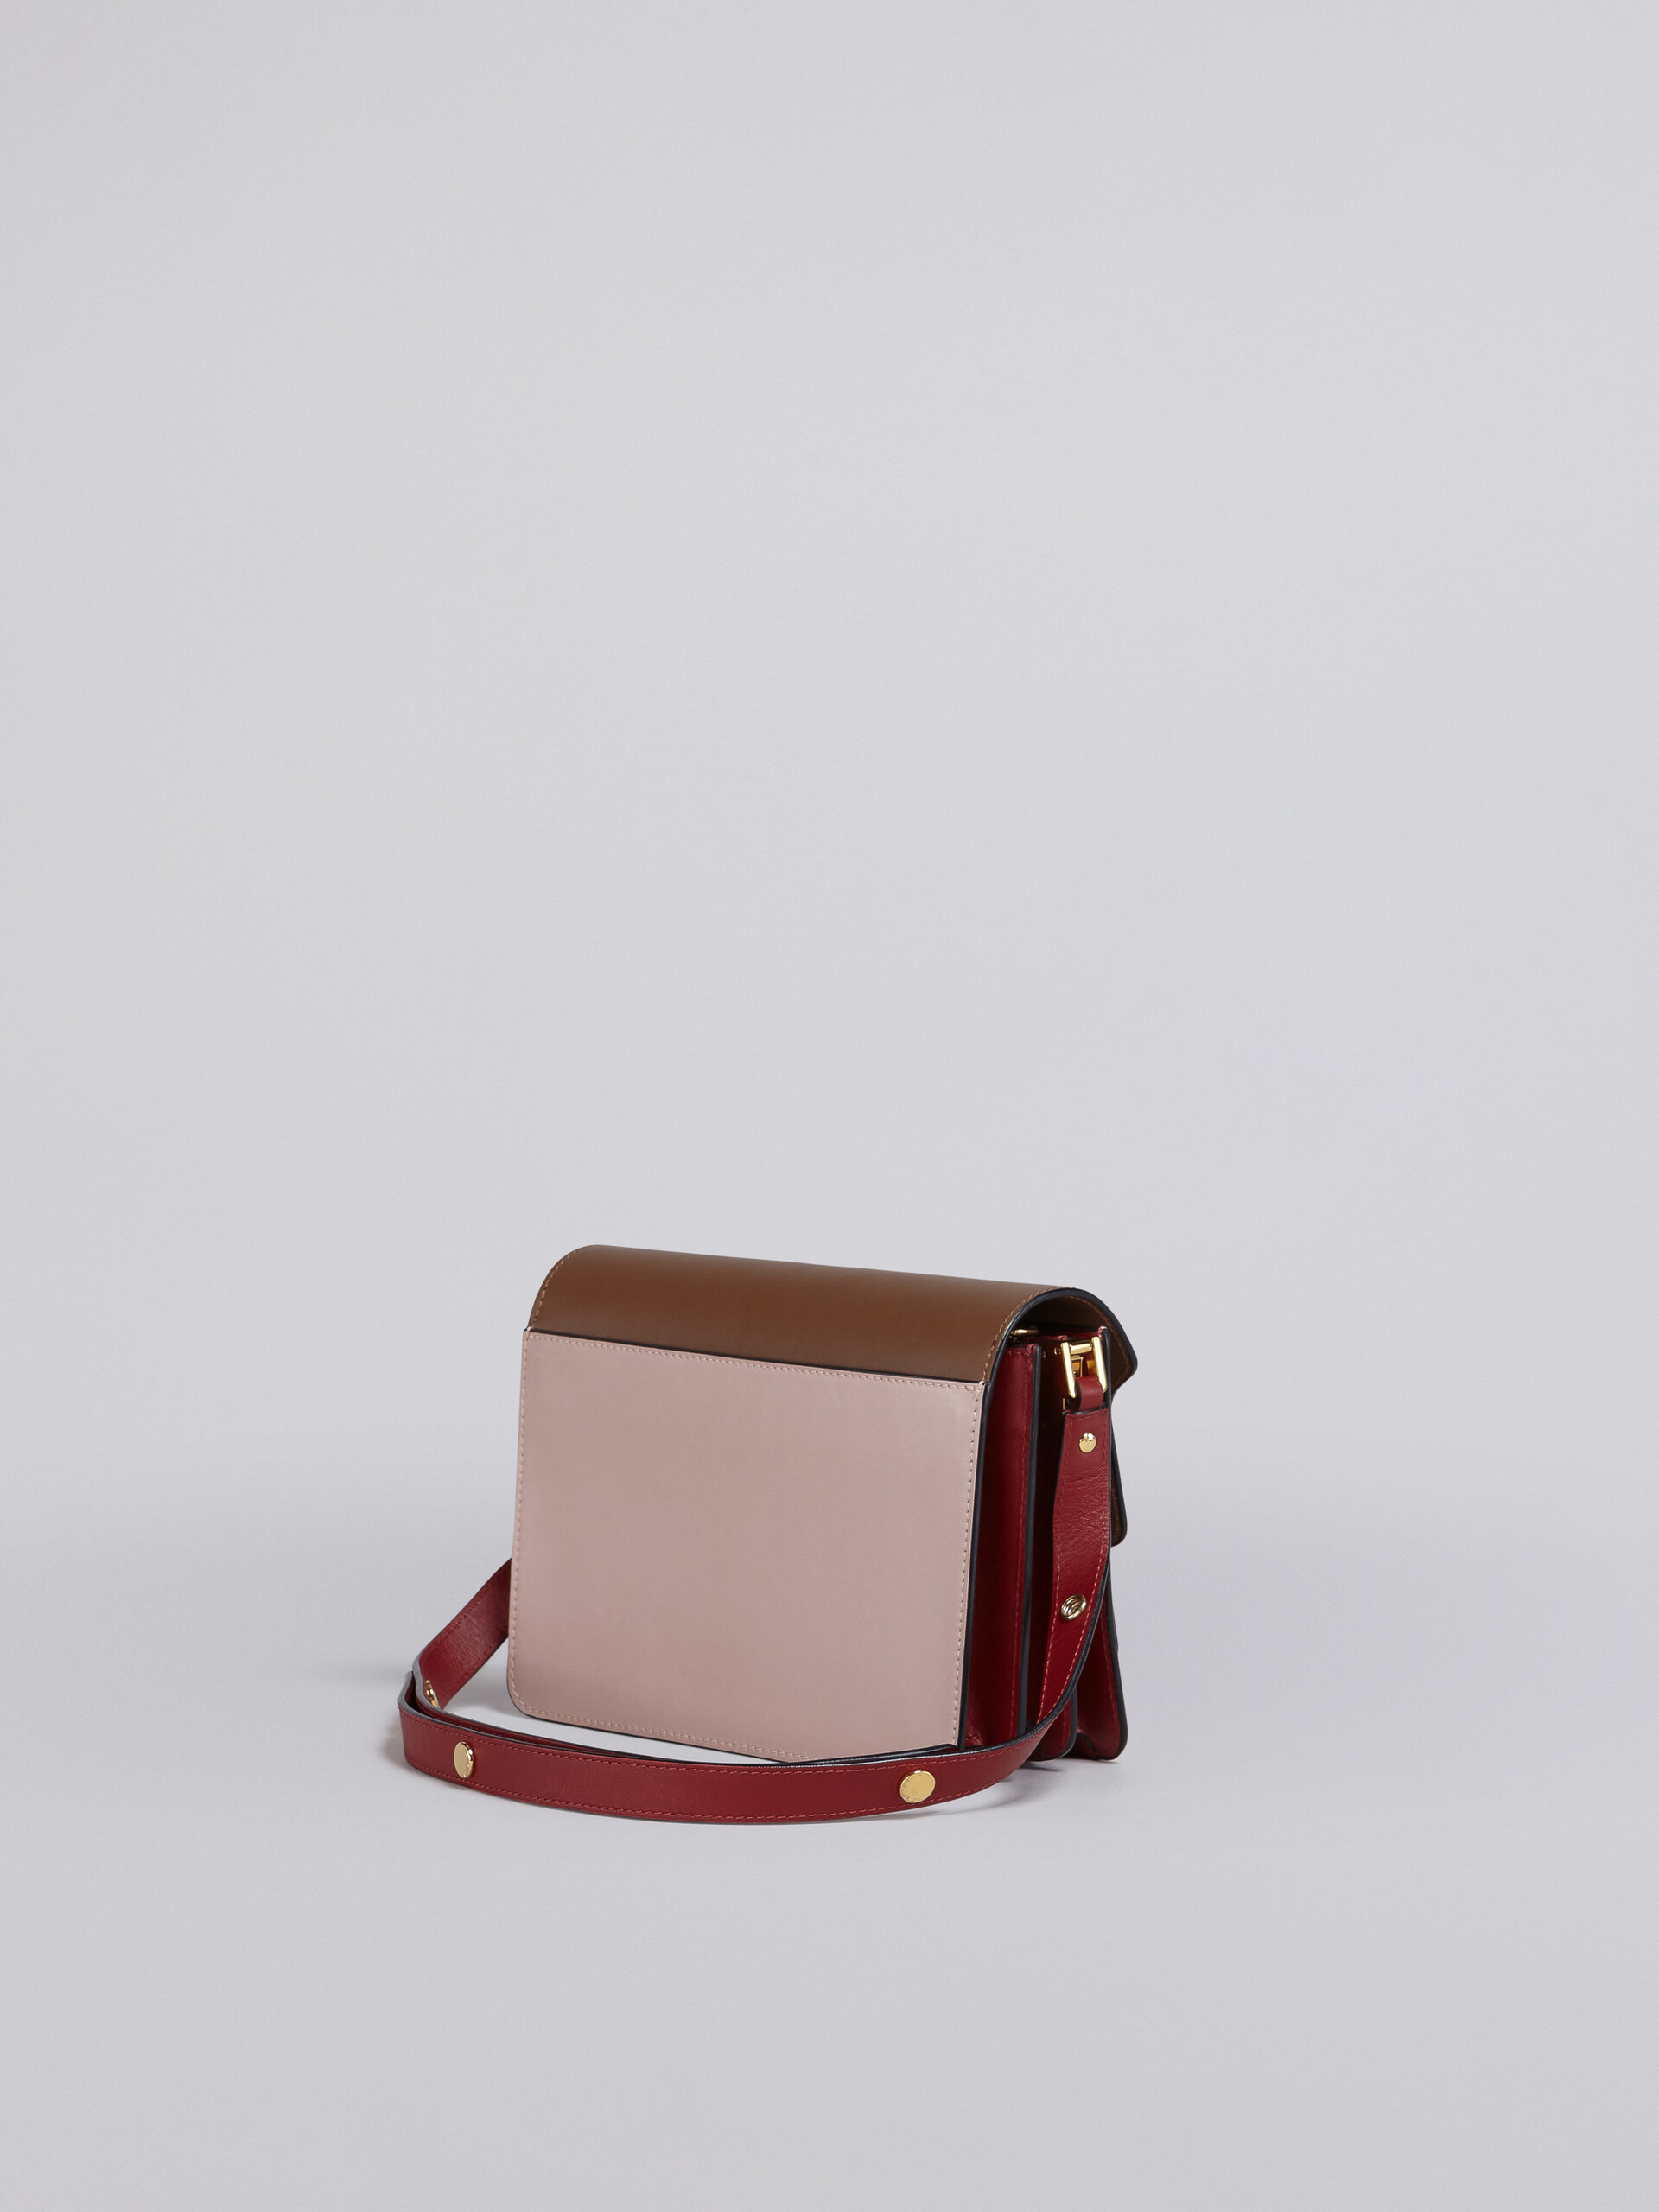 TRUNK medium bag in brown pink and red leather - Shoulder Bags - Image 2